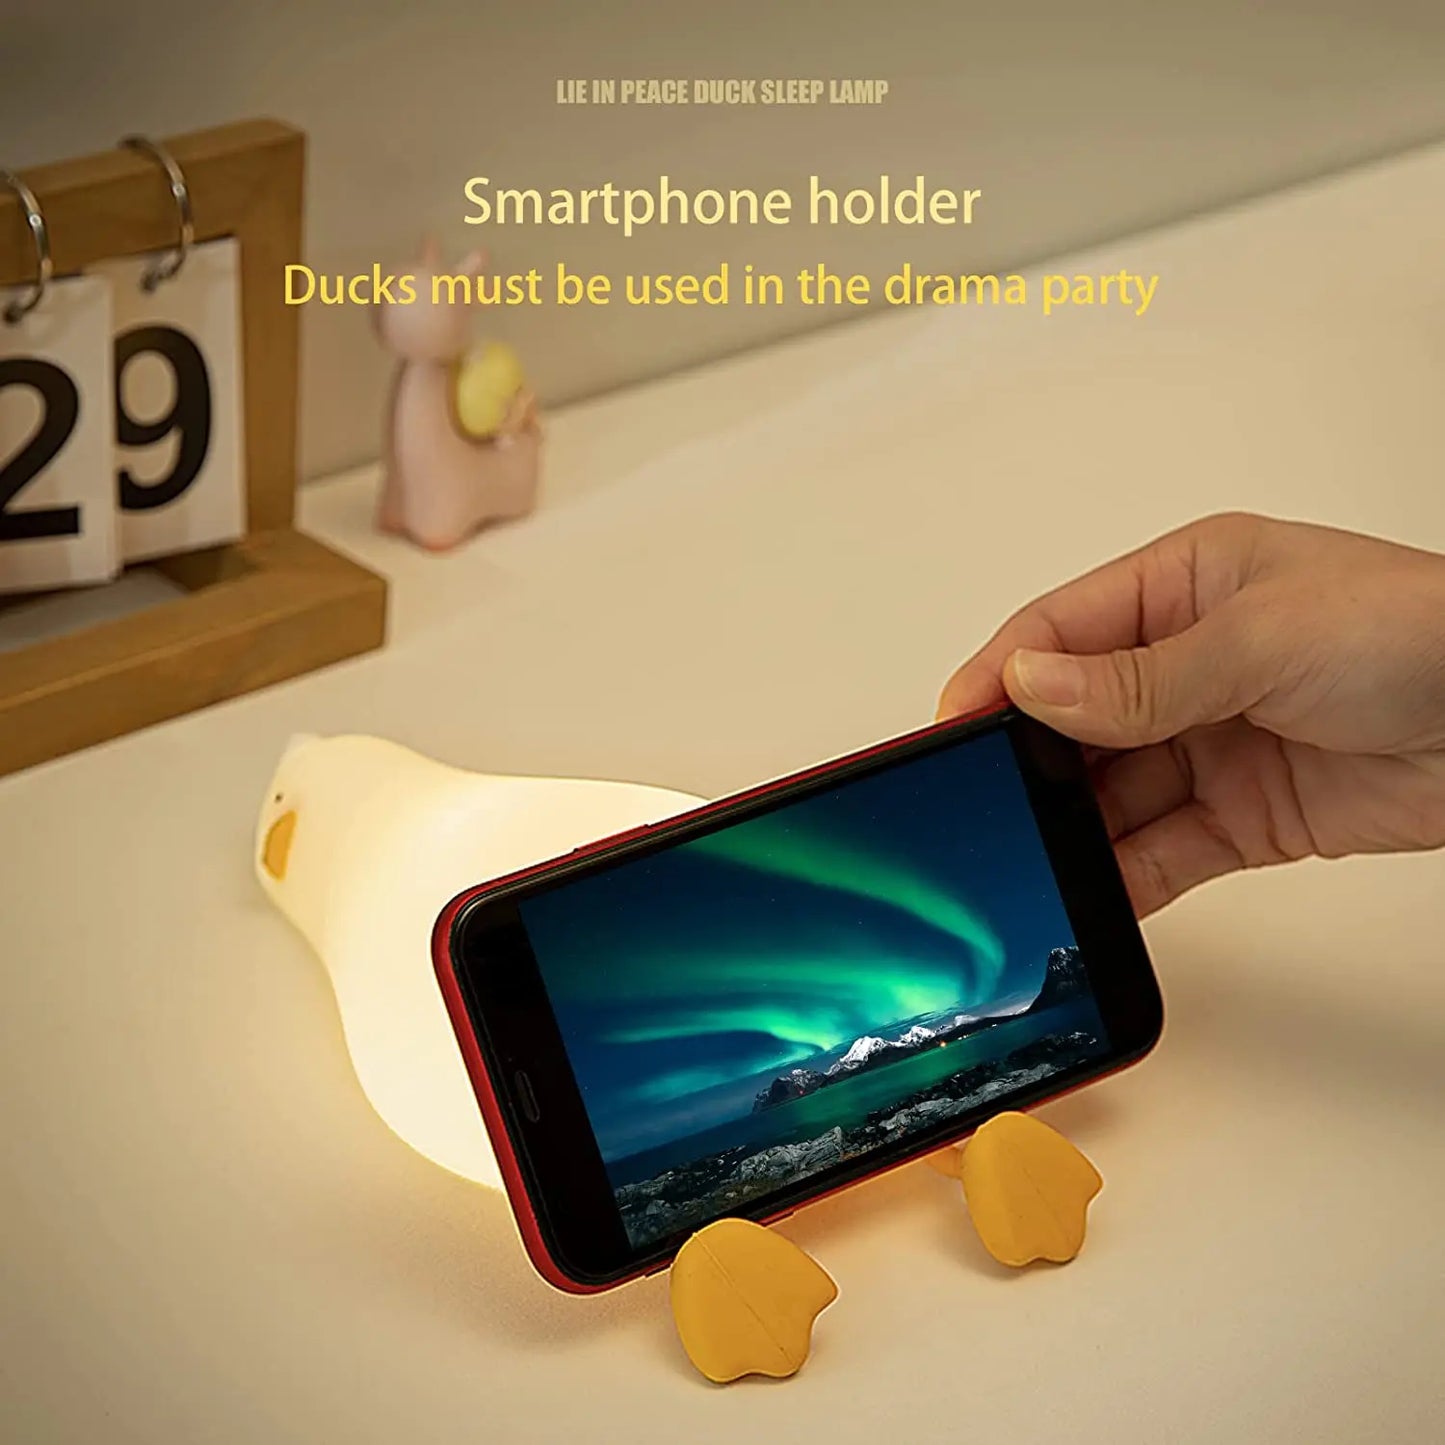 Soothing Silicone Duck Night Light - Lovable Benson The Duck, Rechargeable & Touch-Controlled LED Lamp